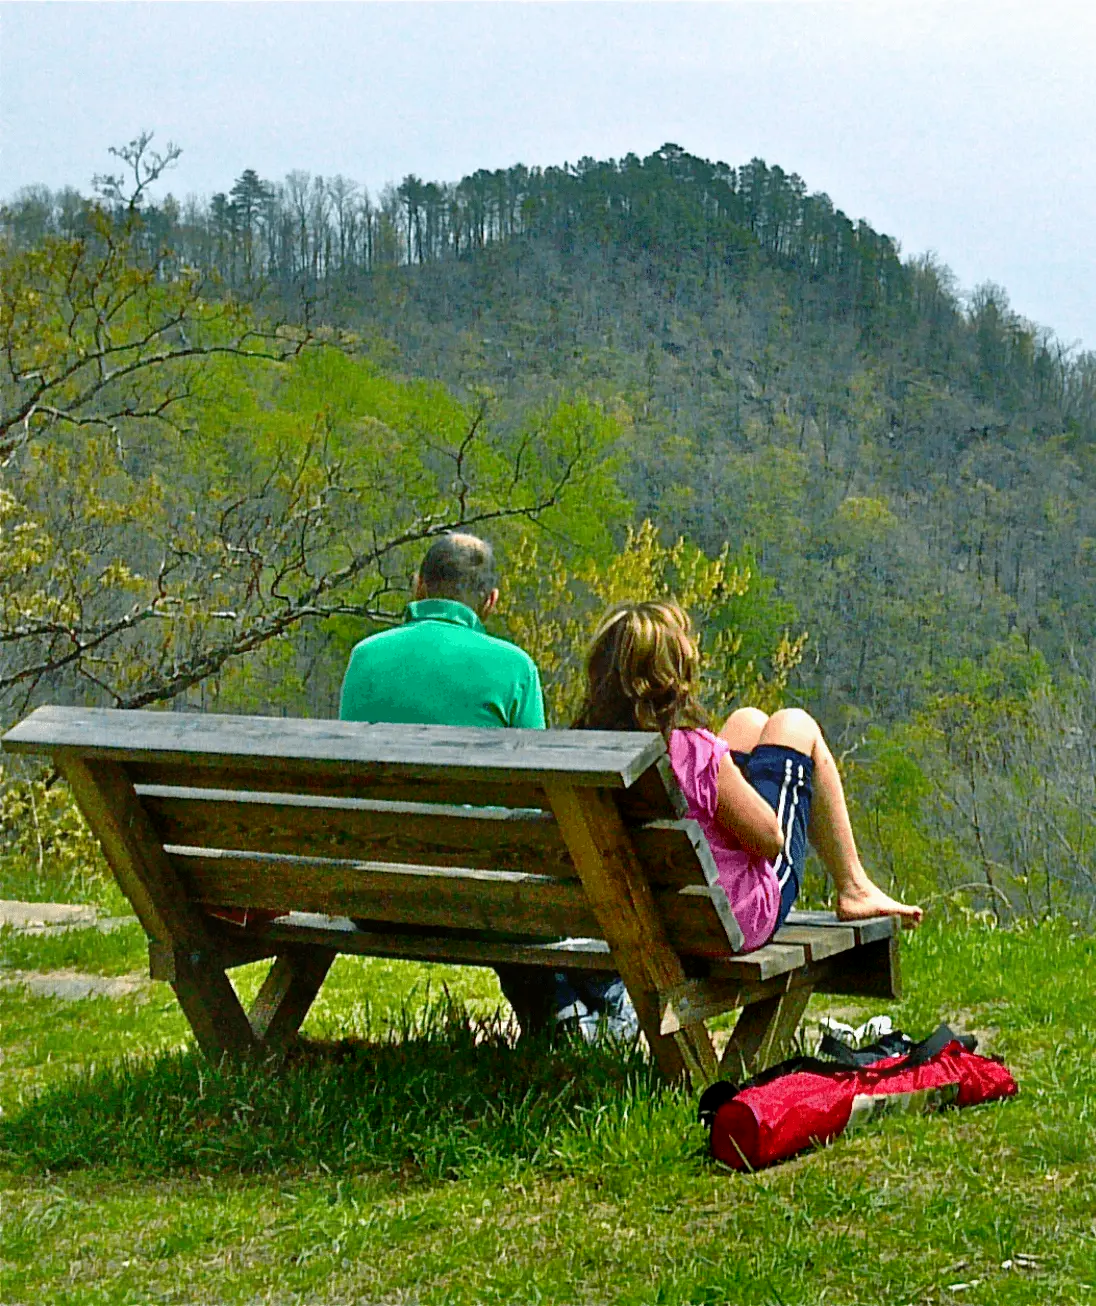 A couple sits on a bench enjoying the view at Point Lookout in Marion, North Carolina